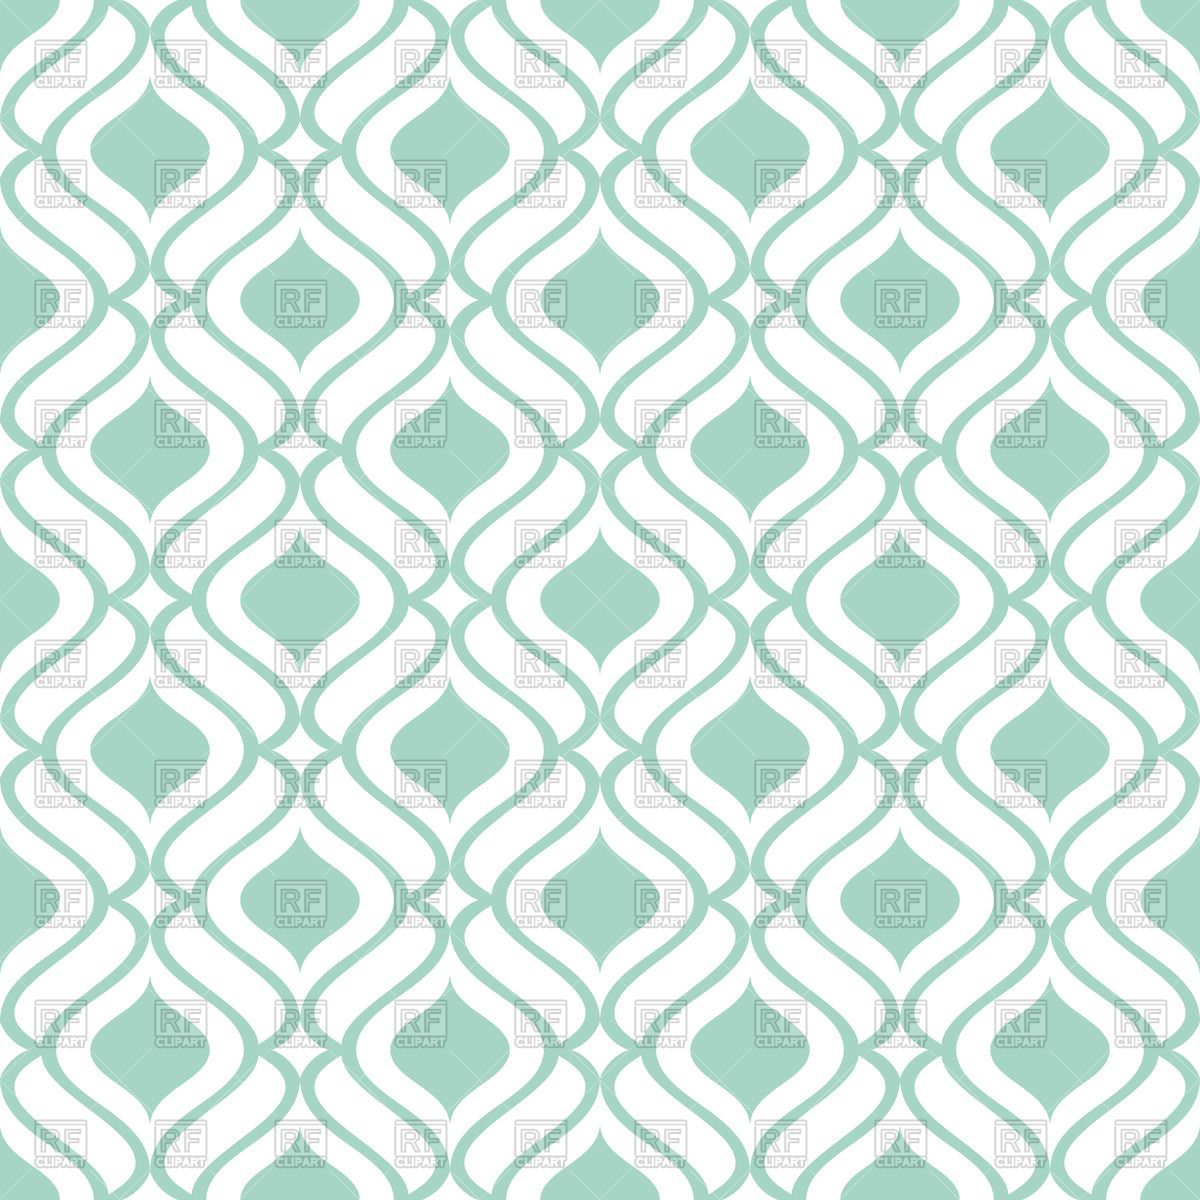  green and white wallpaper with seamless geometric pattern vector